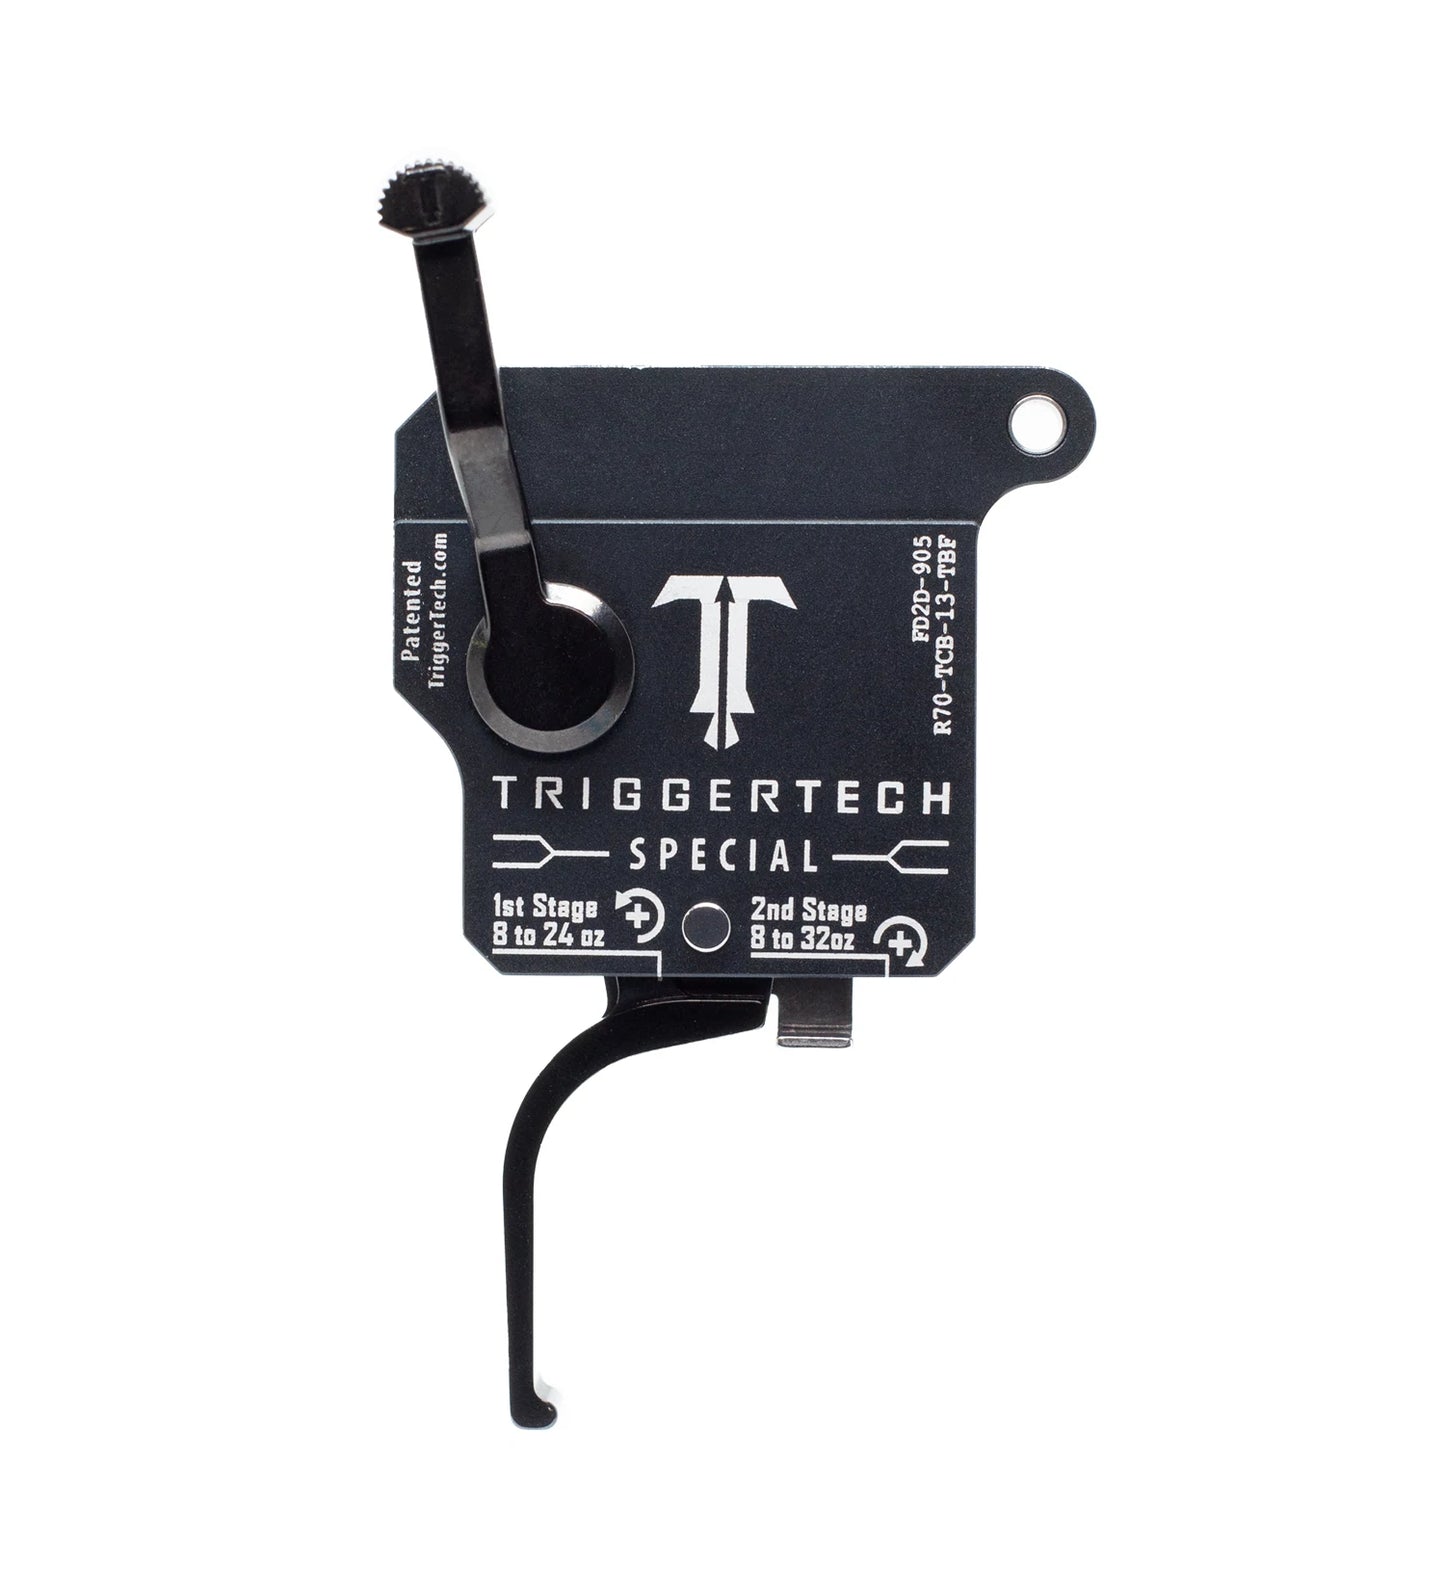 Rem 700 Two-Stage - TriggerTech